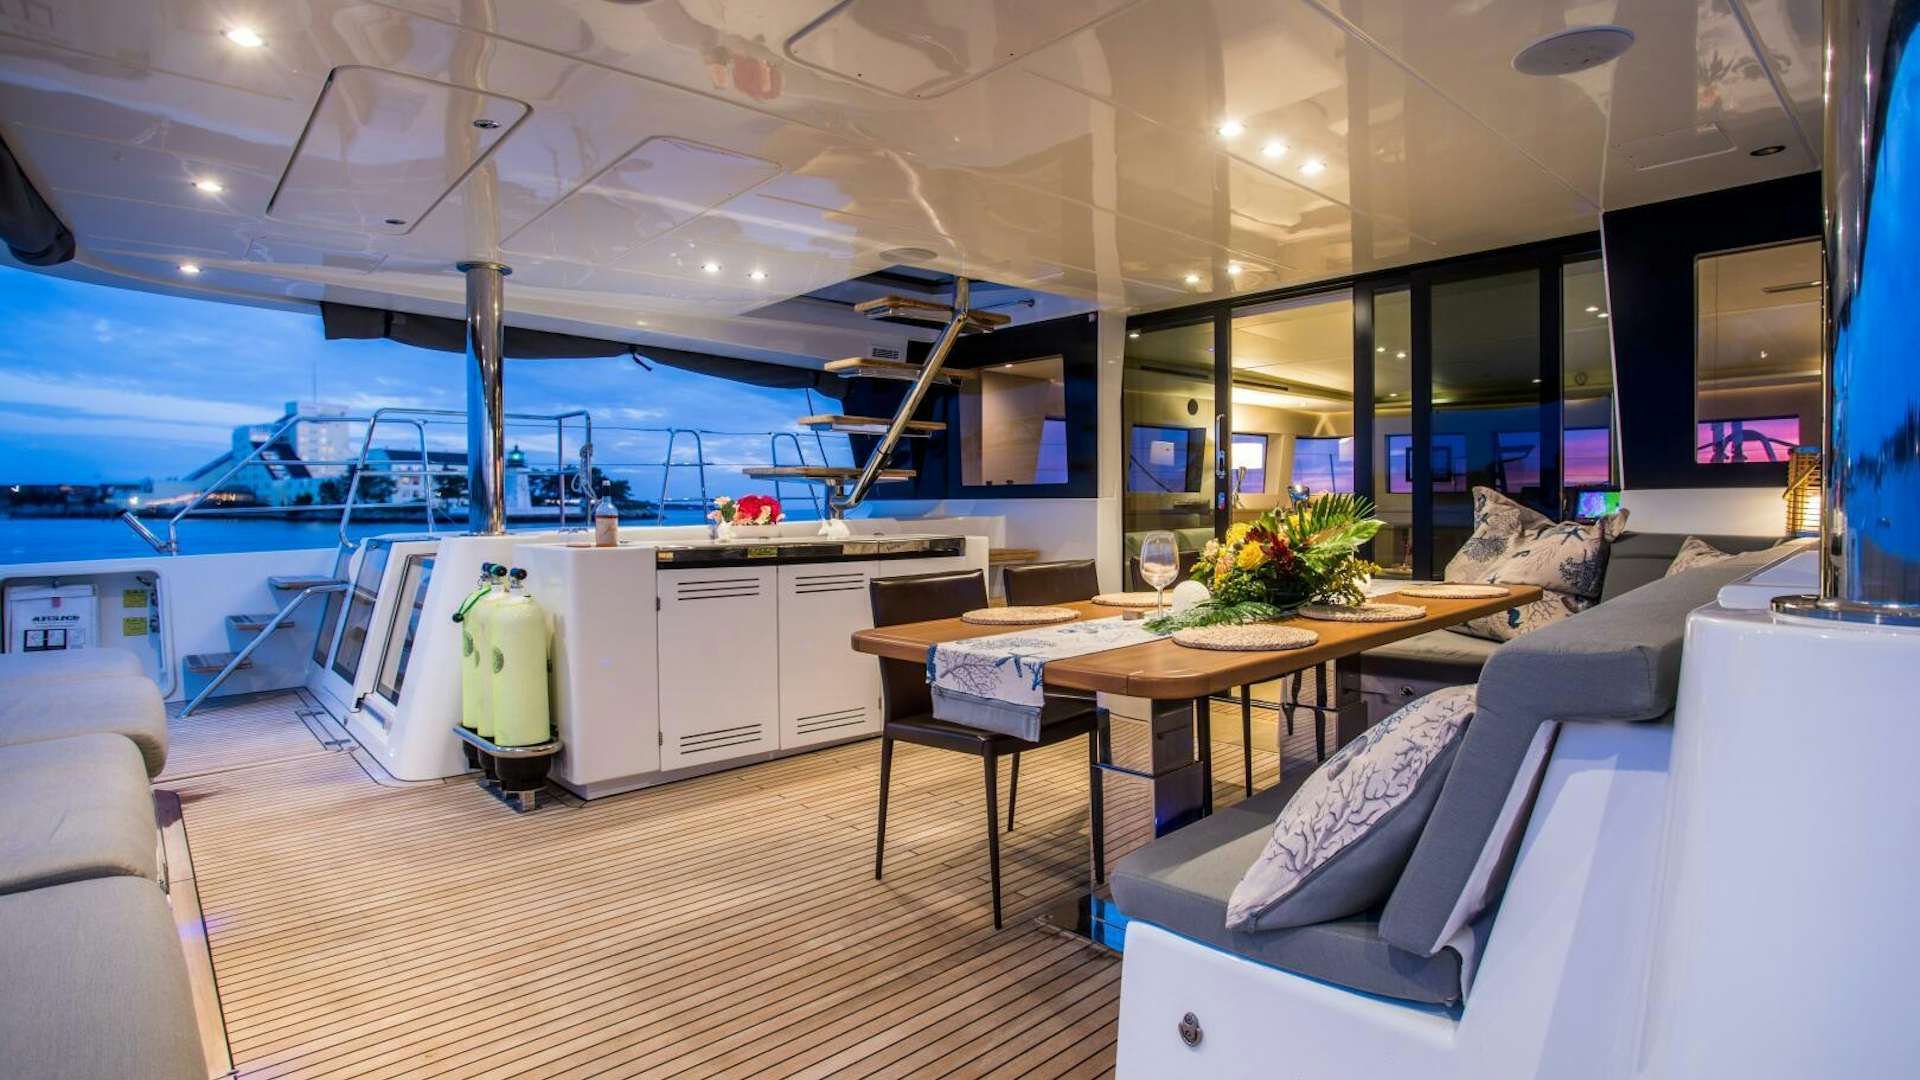 Second wave
Yacht for Sale